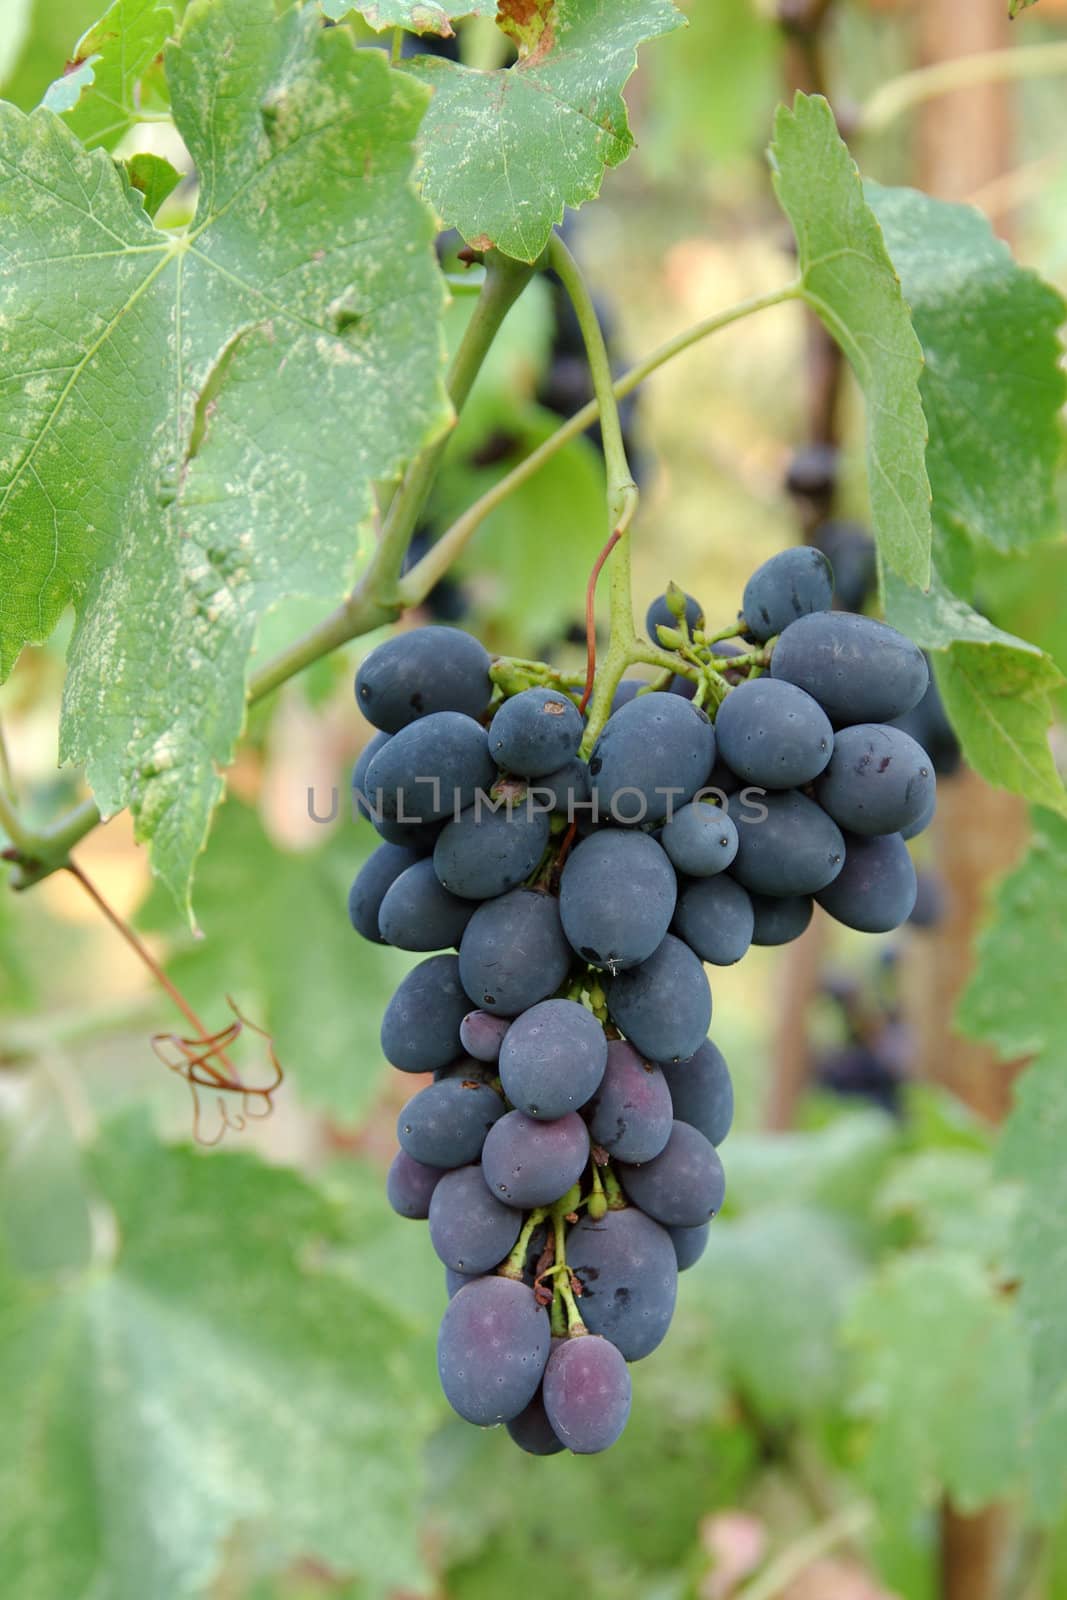 Bunch of black grape hanging among green leaves